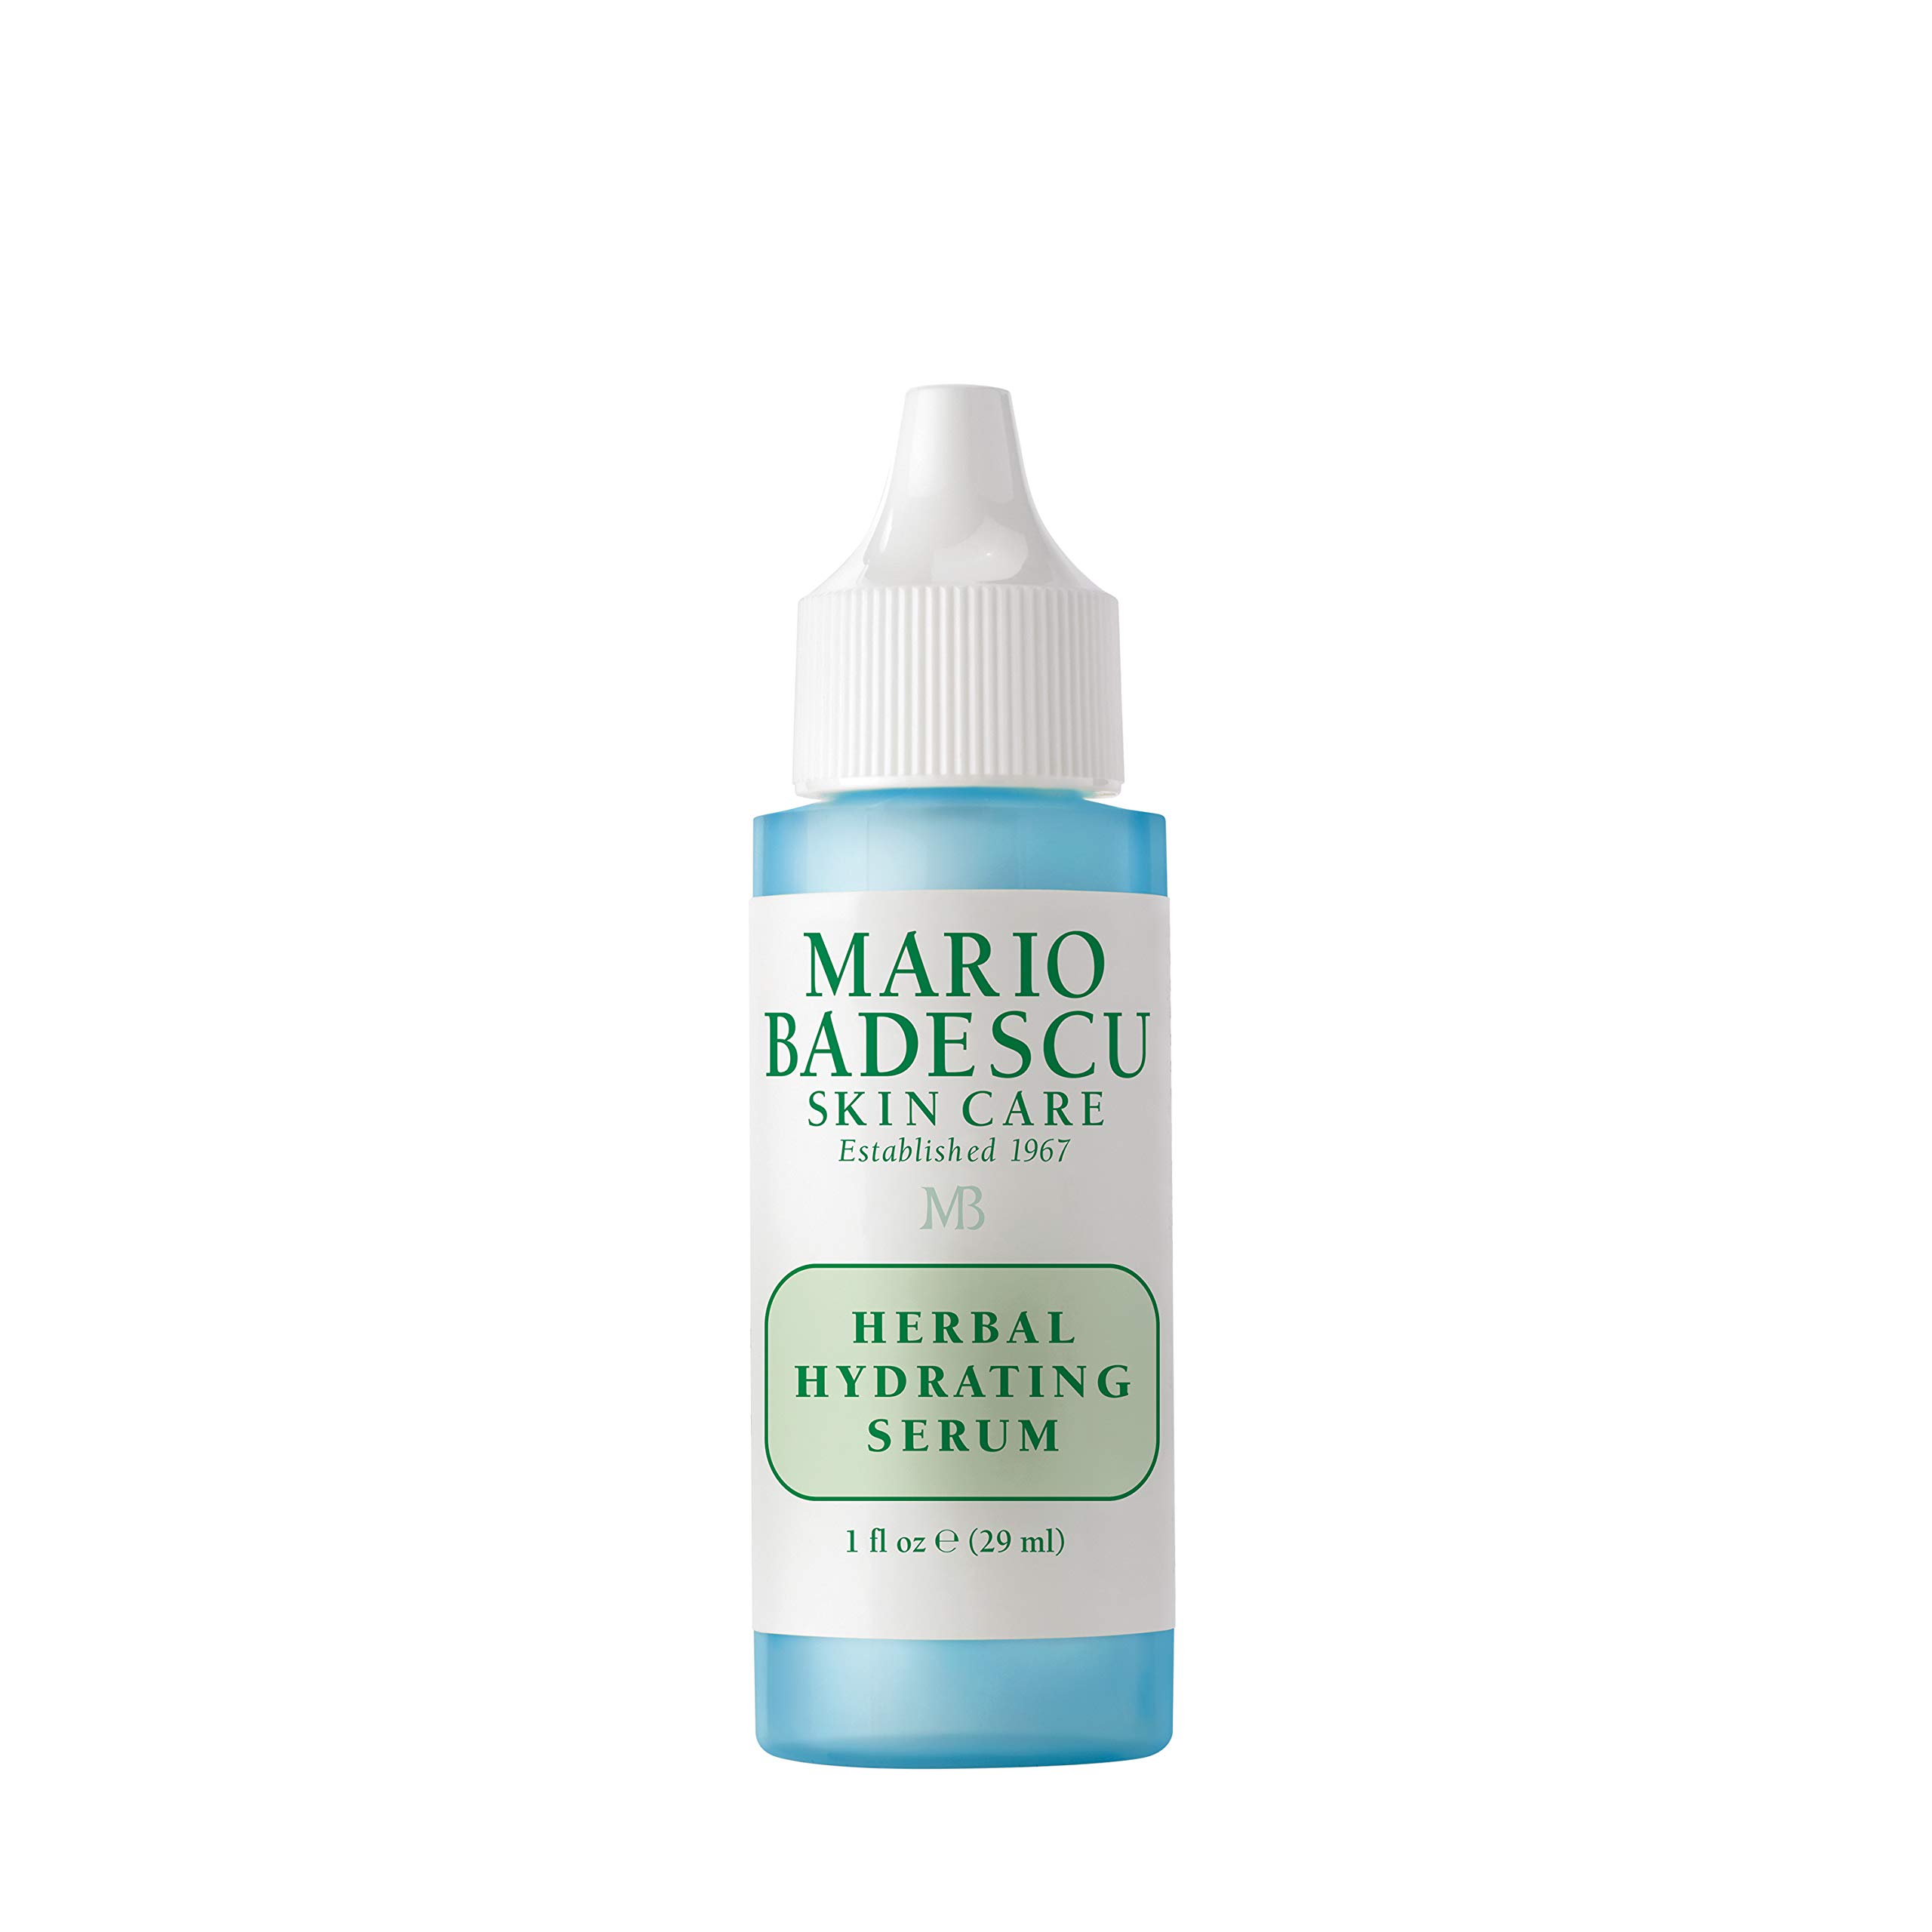 Mario Badescu Herbal Hydrating Serum for All Skin Types |Oil Free Serum that Leaves Skin Supple |Formulated with Ceramides & Gingko Extract| 1 FL OZ